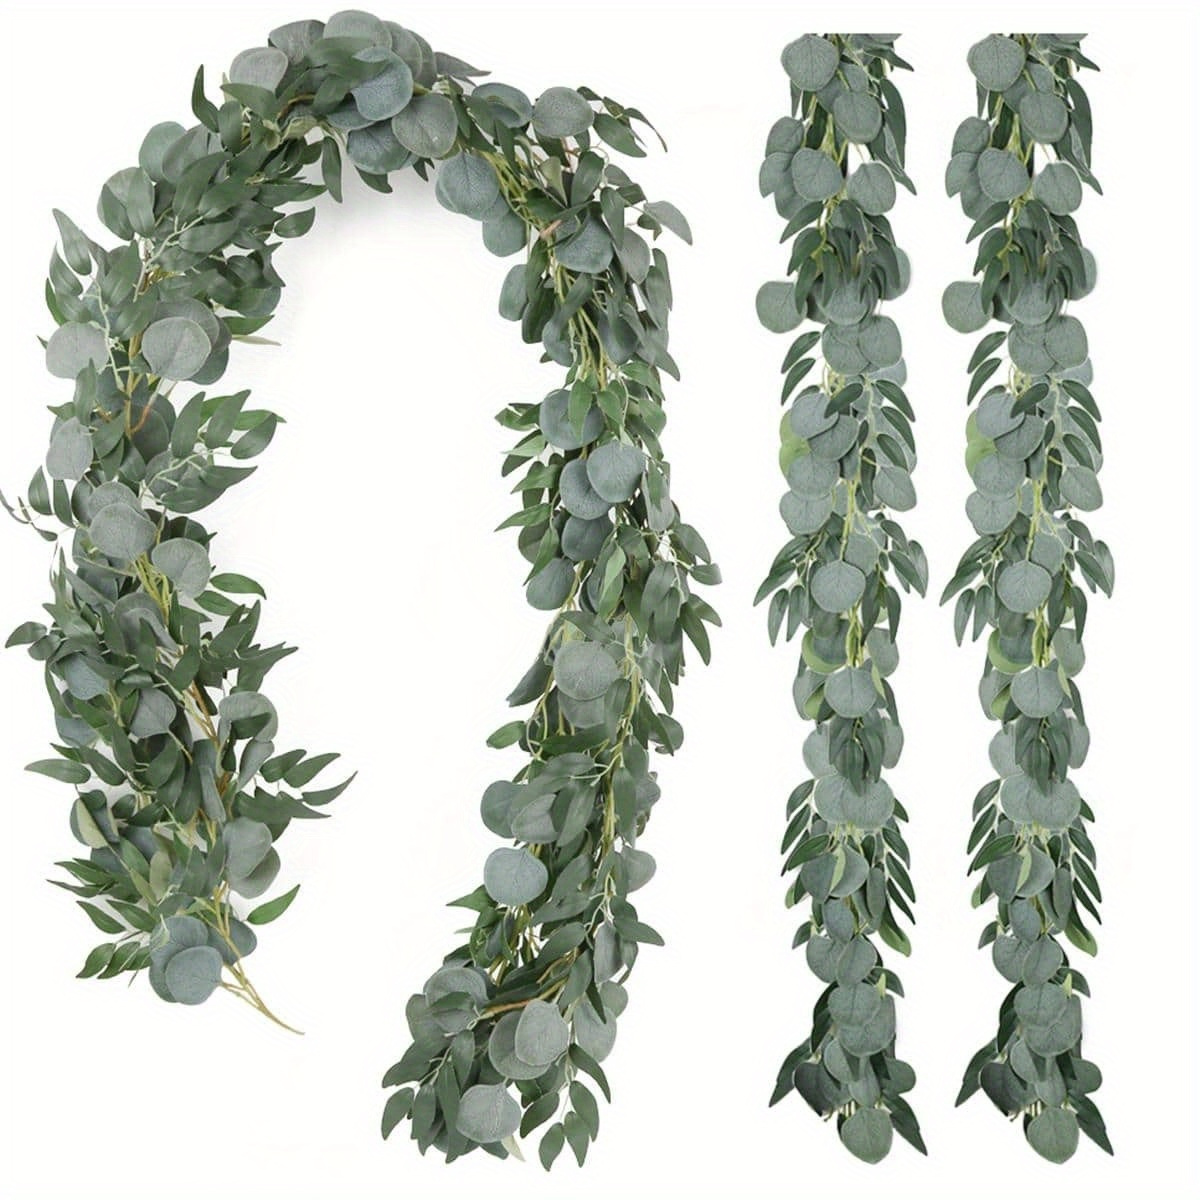 

2 Packs 6.5ft Artificial Eucalyptus Garland With , Spring Greenery Garland Fake Silver Dollar Eucalyptus Vines For Centerpieces Table Runner Wedding Arch Home Bridal Baby Shower Decor